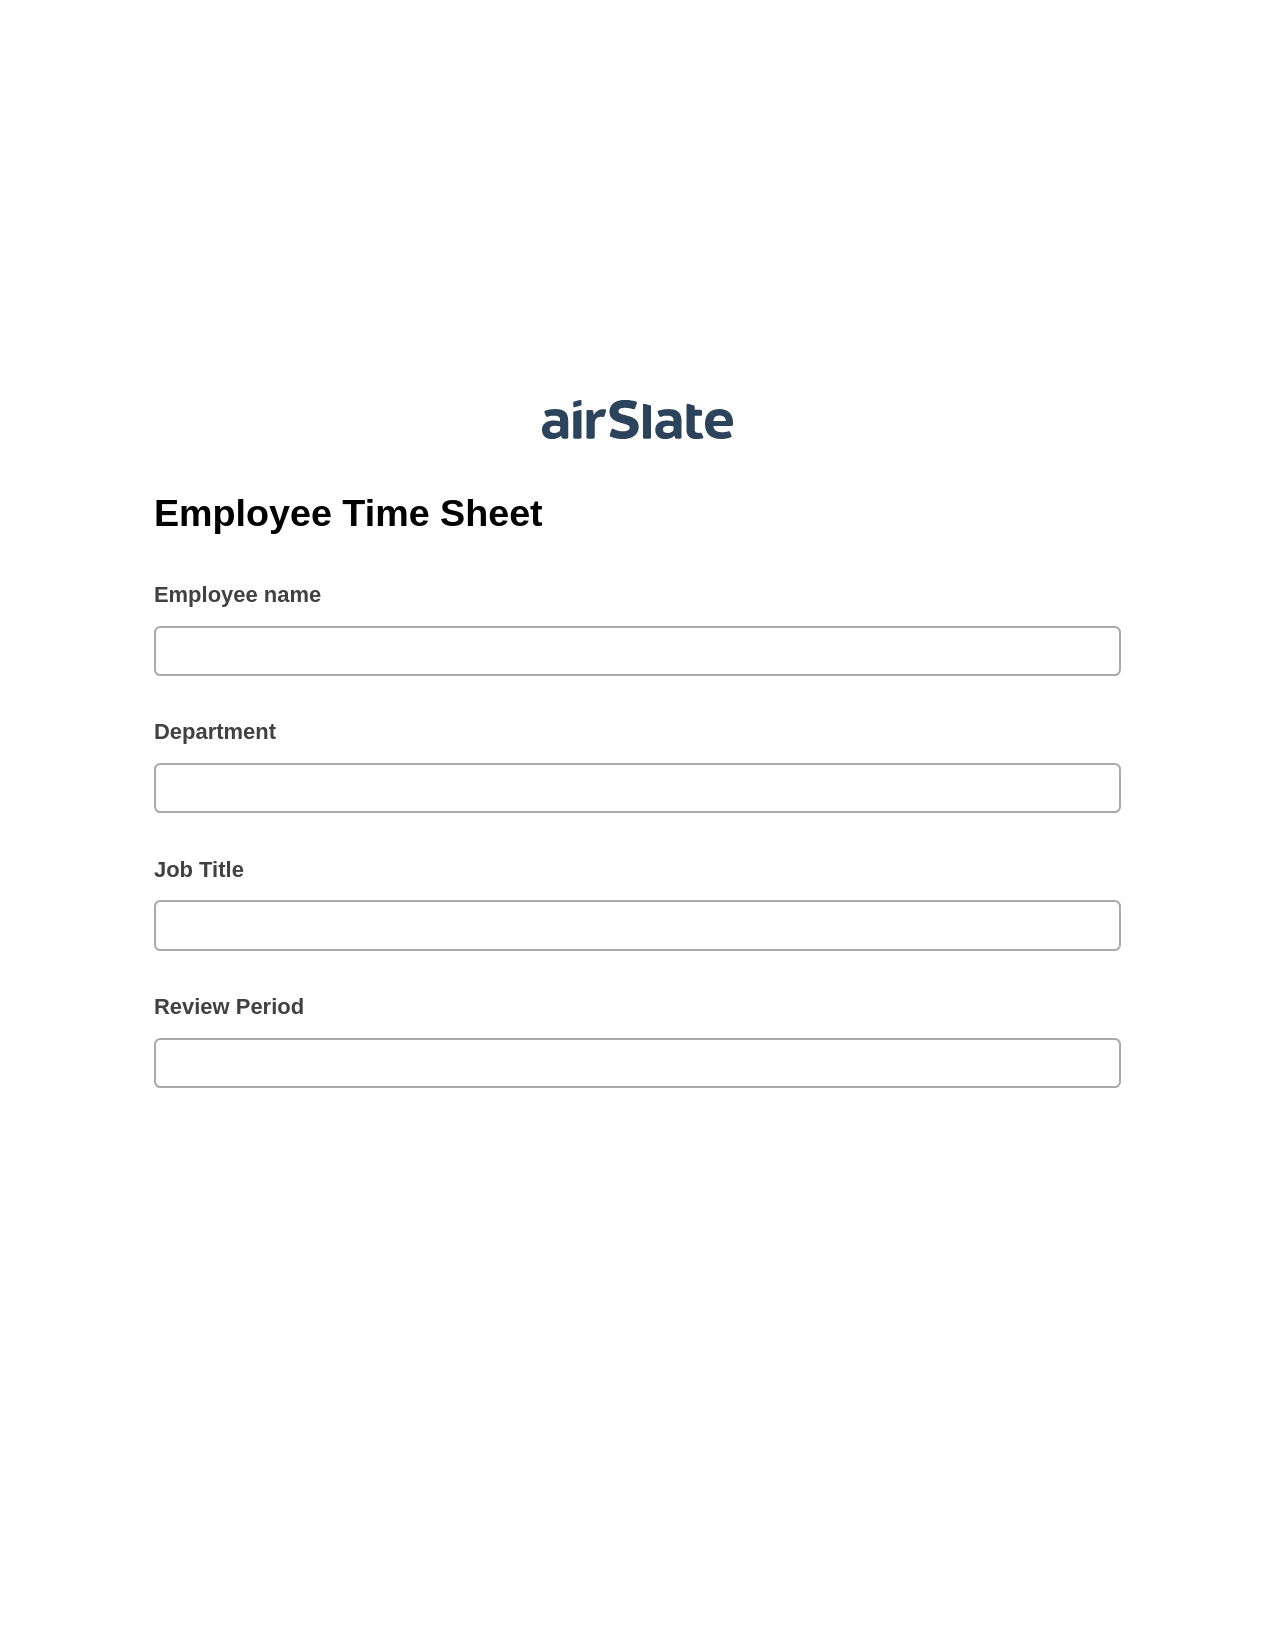 Employee Time Sheet Pre-fill from another Slate Bot, Google Cloud Print Bot, Export to WebMerge Bot